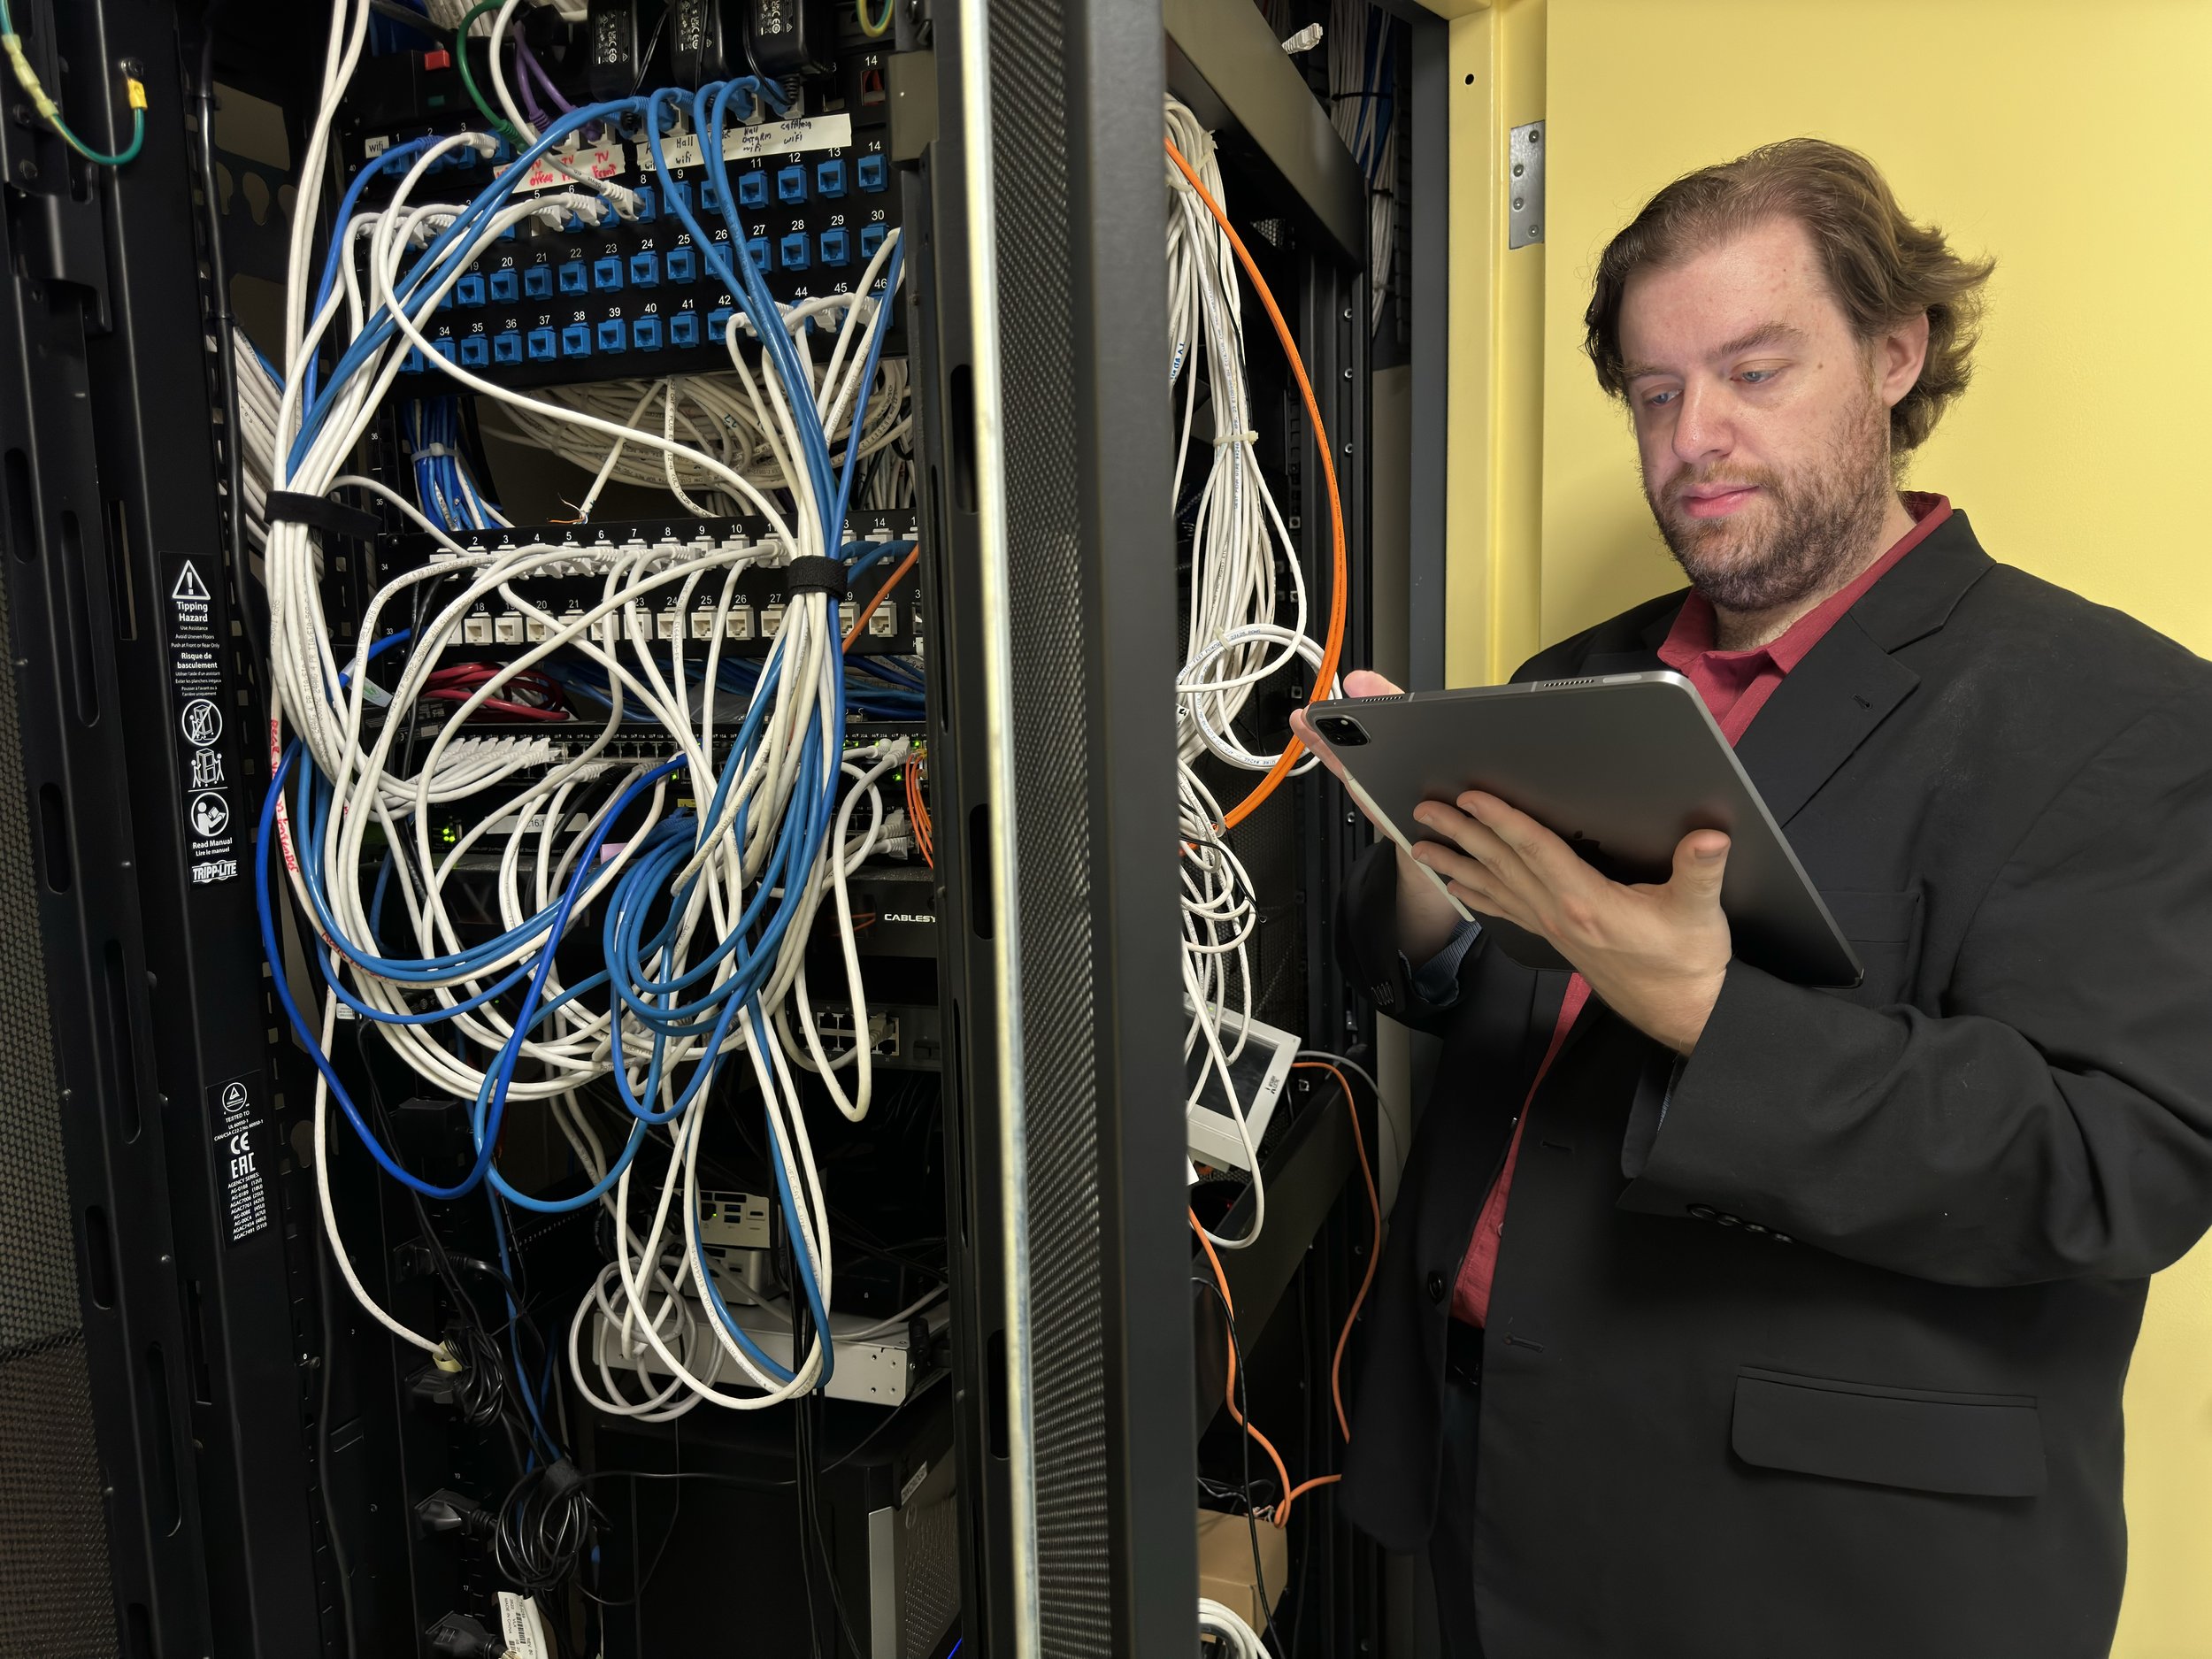  Alex stands in a network closet working on an iPad Pro. 